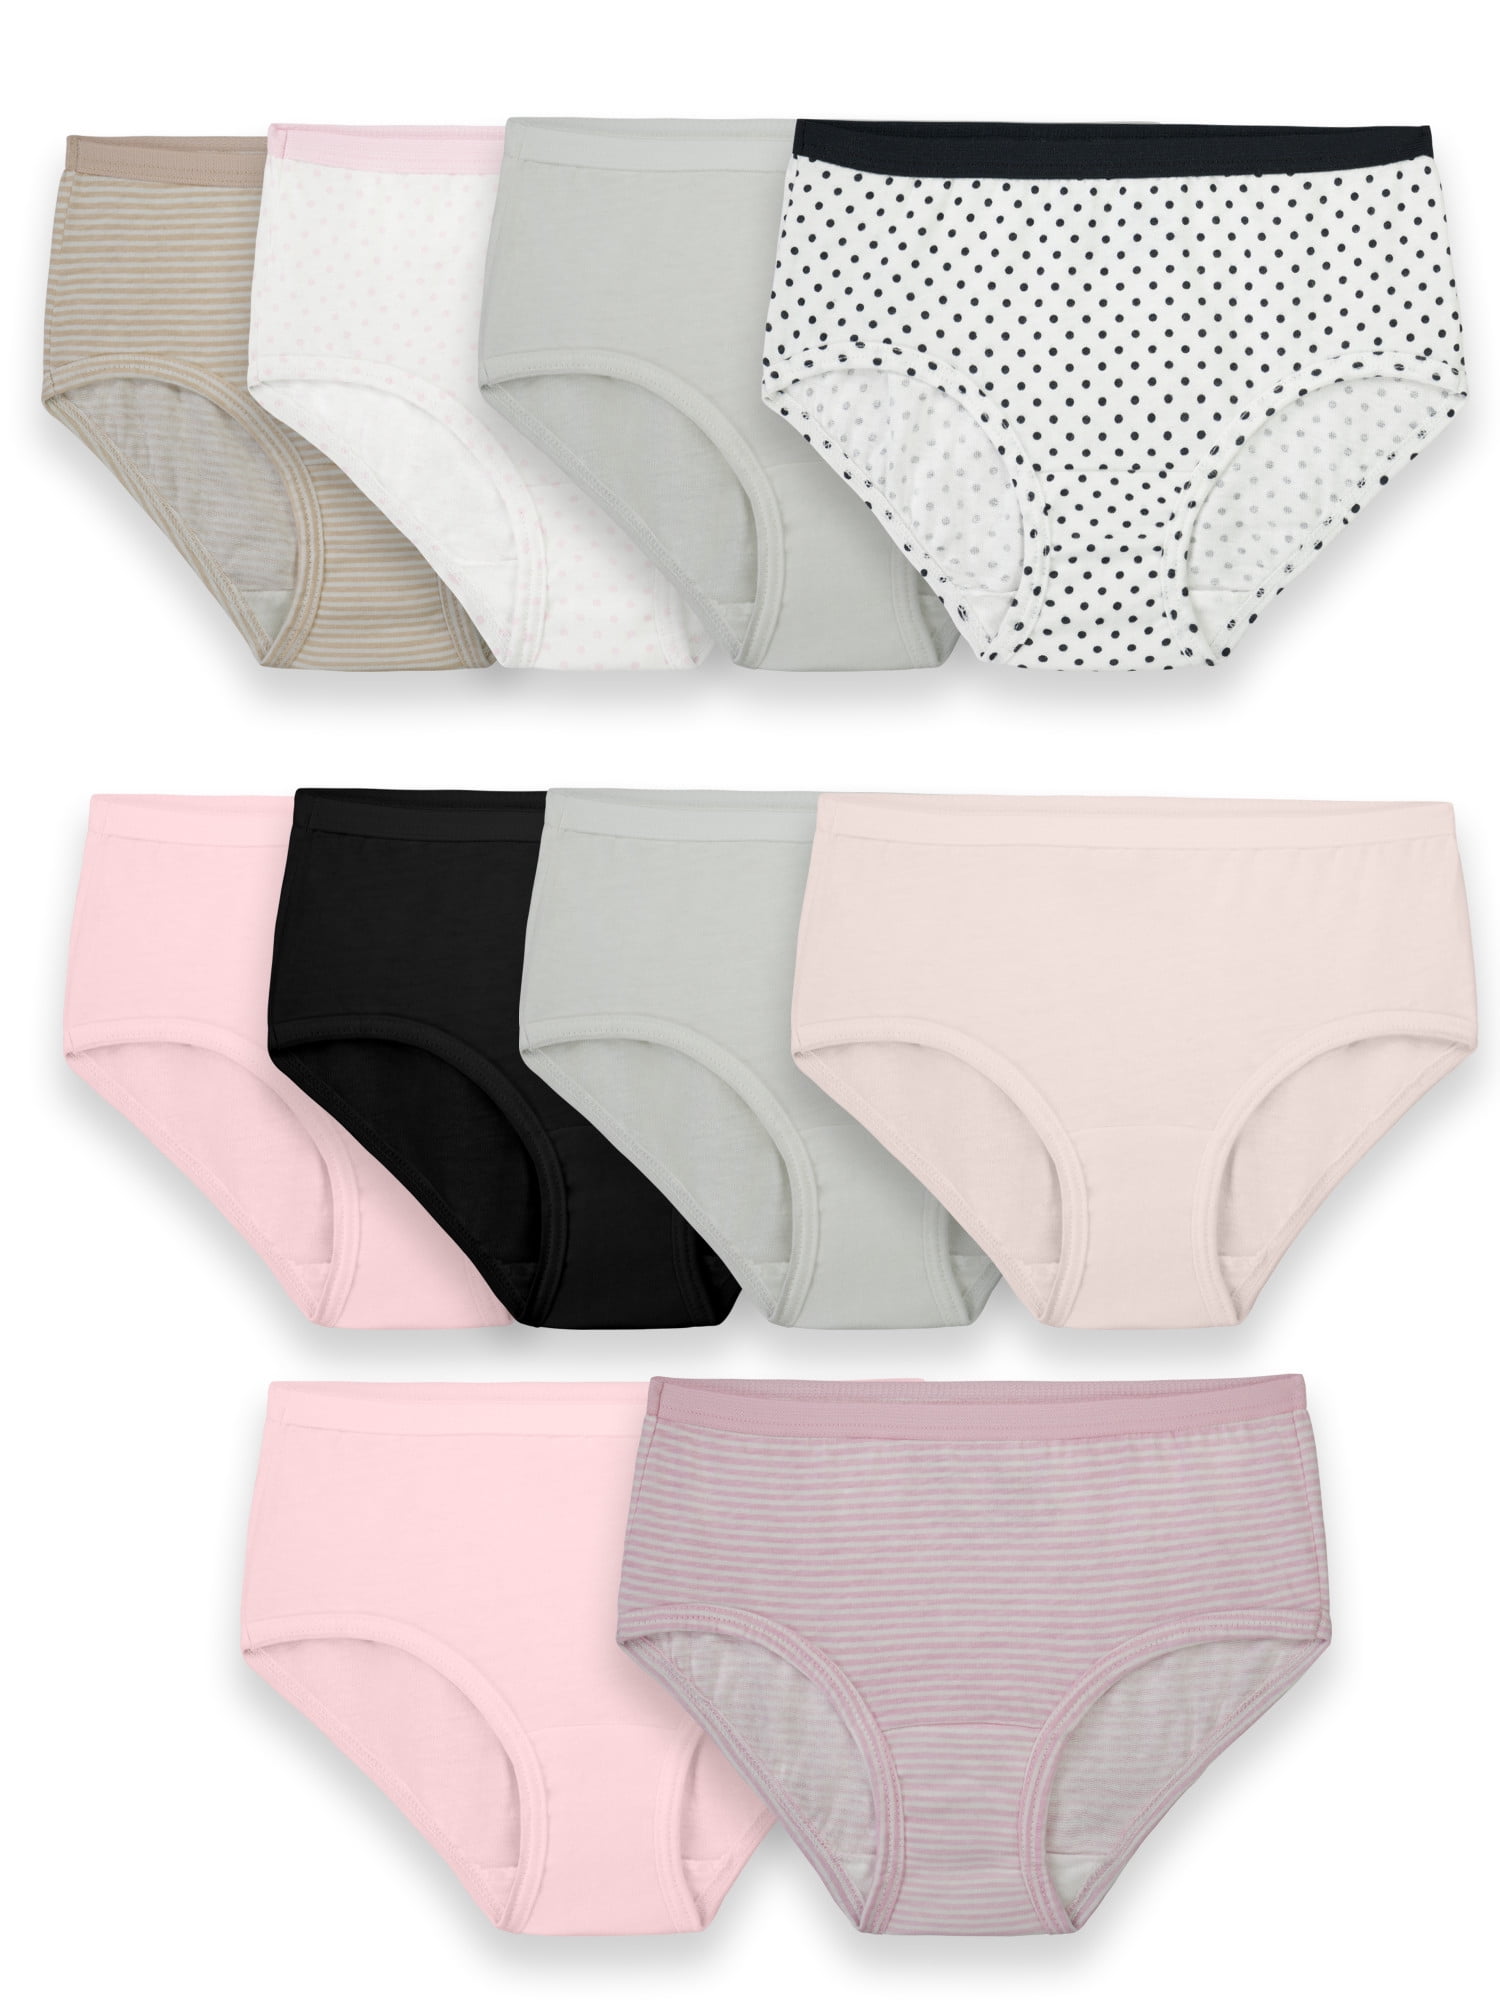 18 Pack Cotton Brief Panties Size 10 Fruit of the Loom Girls' Underwear 